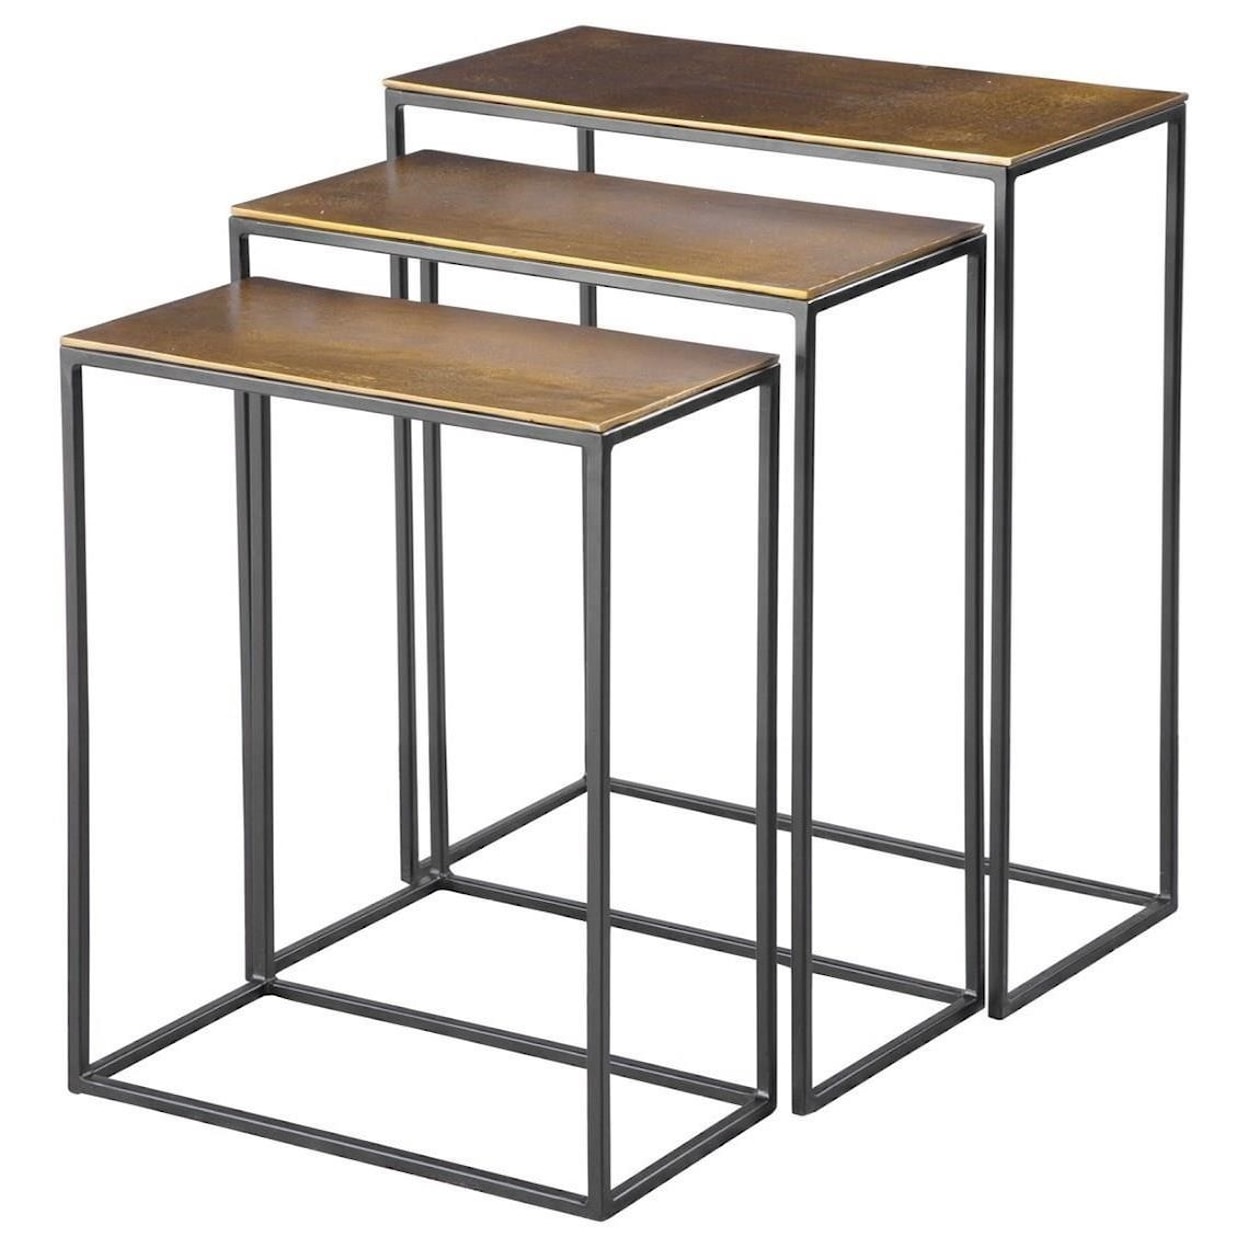 Uttermost Accent Furniture - Occasional Tables Coreene Gold Nesting Tables Set/3